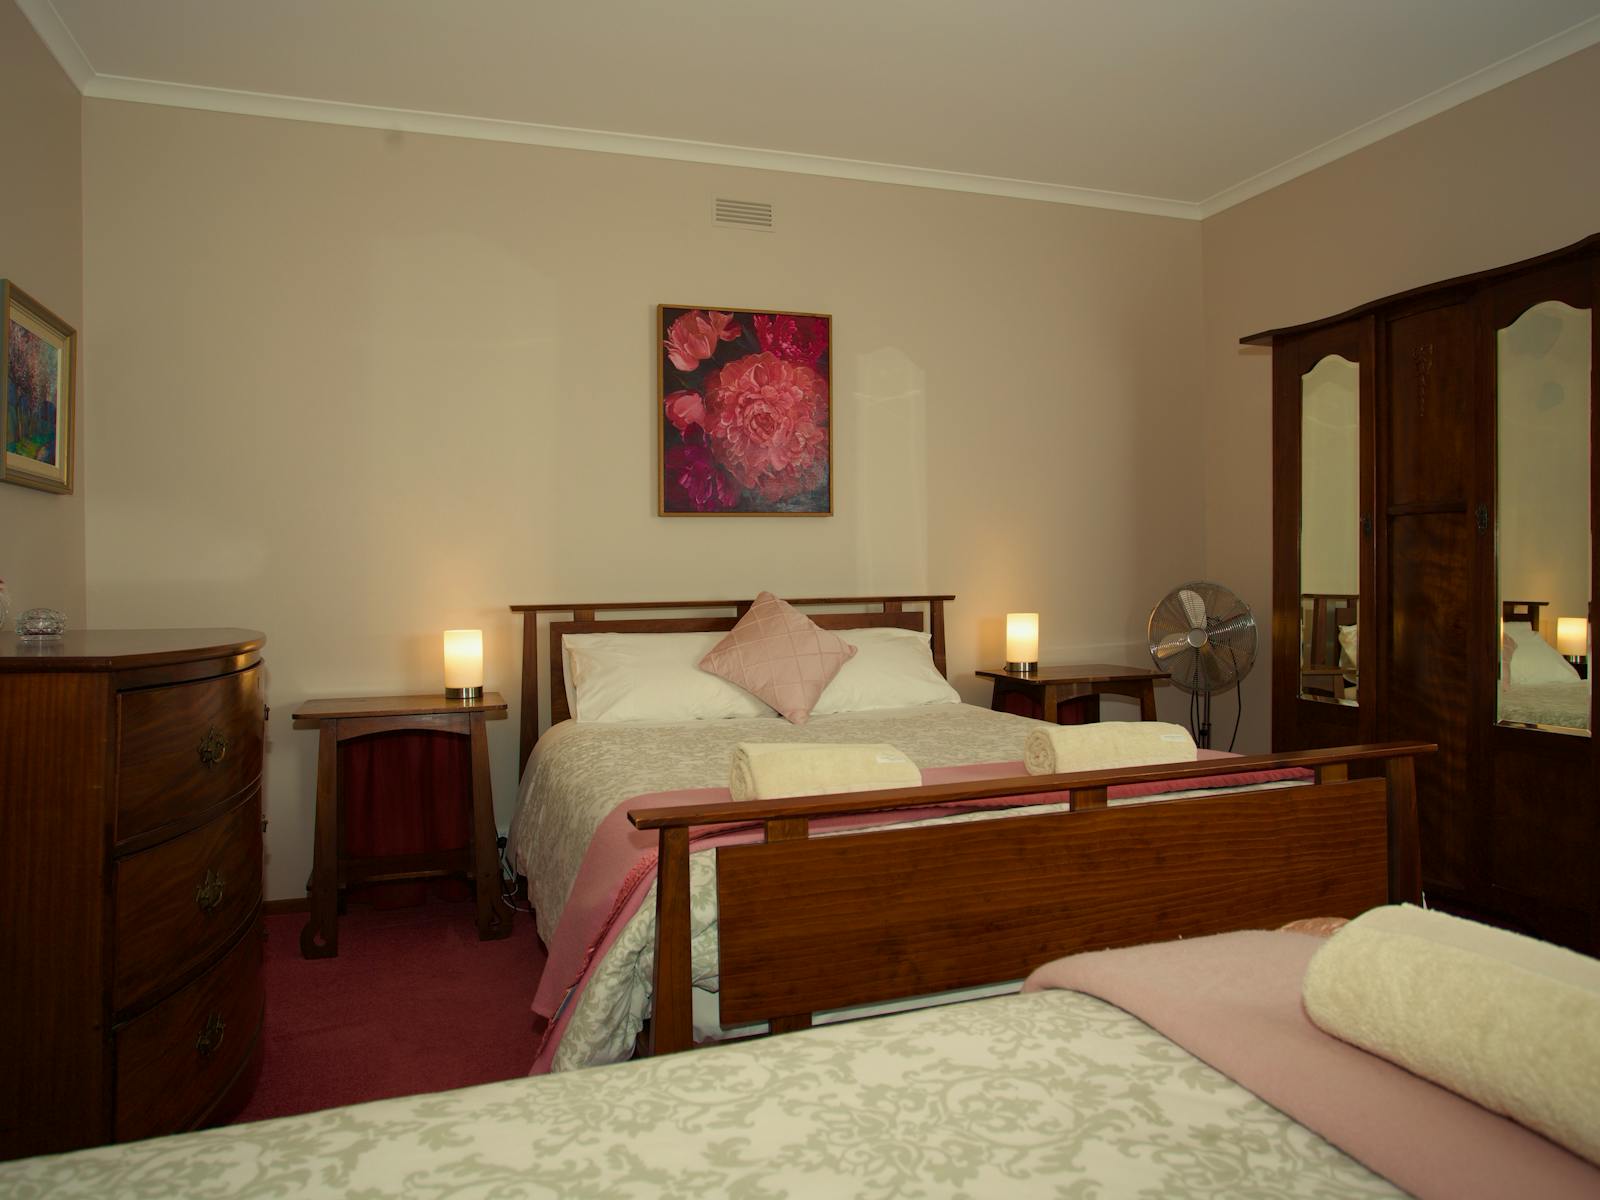 Warm and cosy downstairs bedroom. Briar Lane Accommodation Evandale